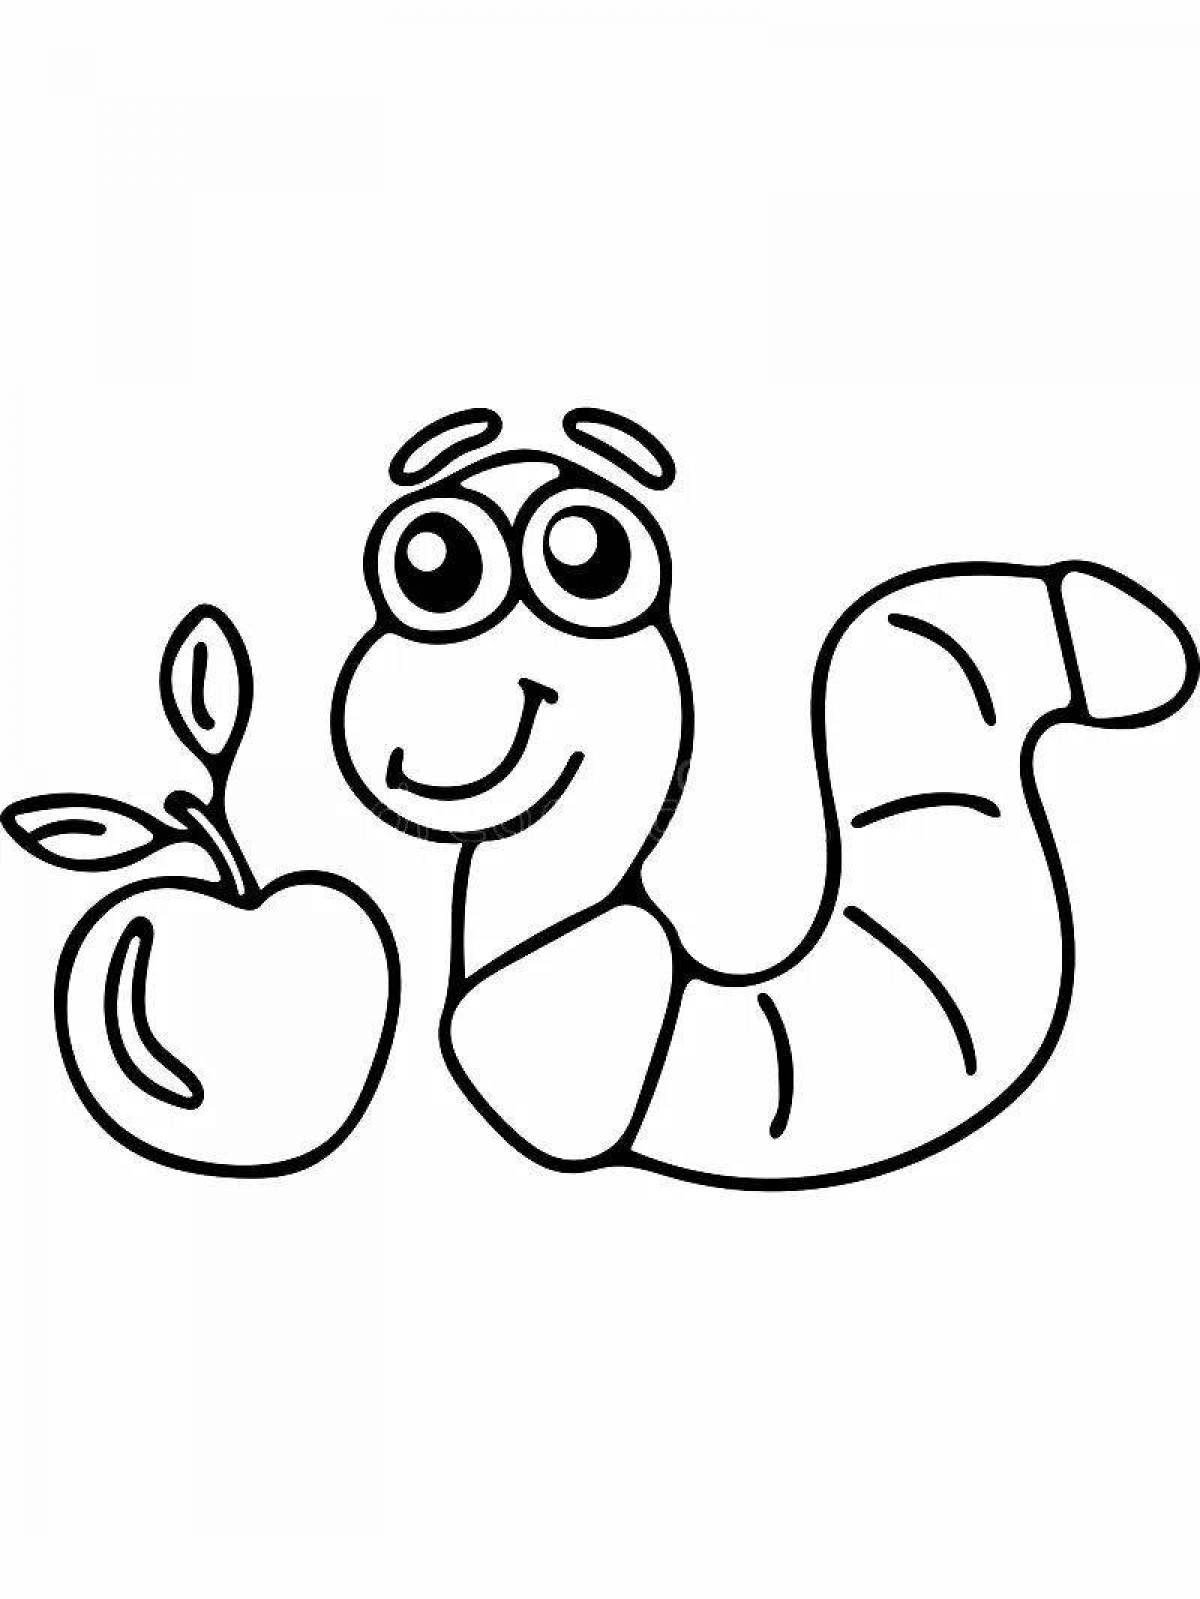 Playful worm coloring page for kids